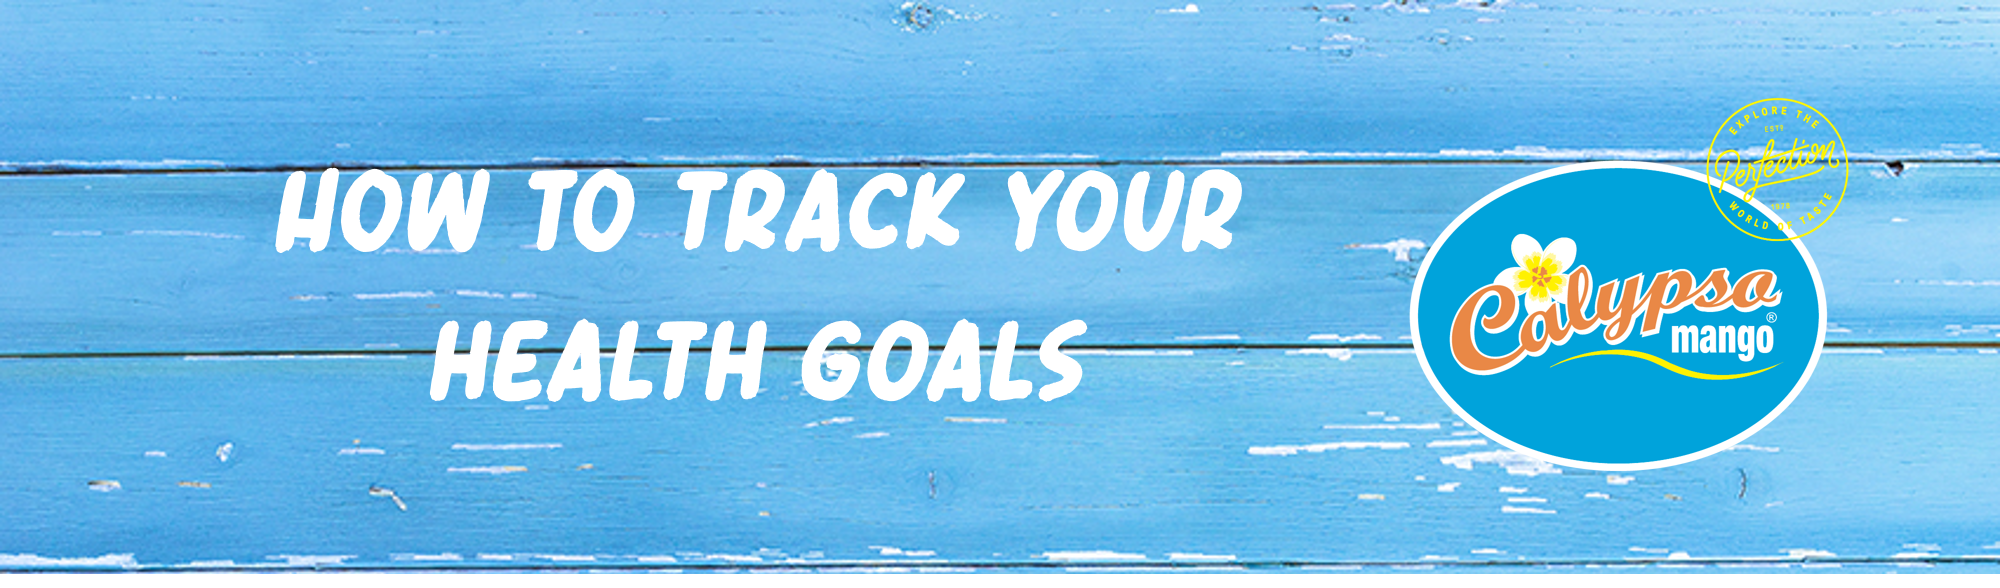 How to track your health goals